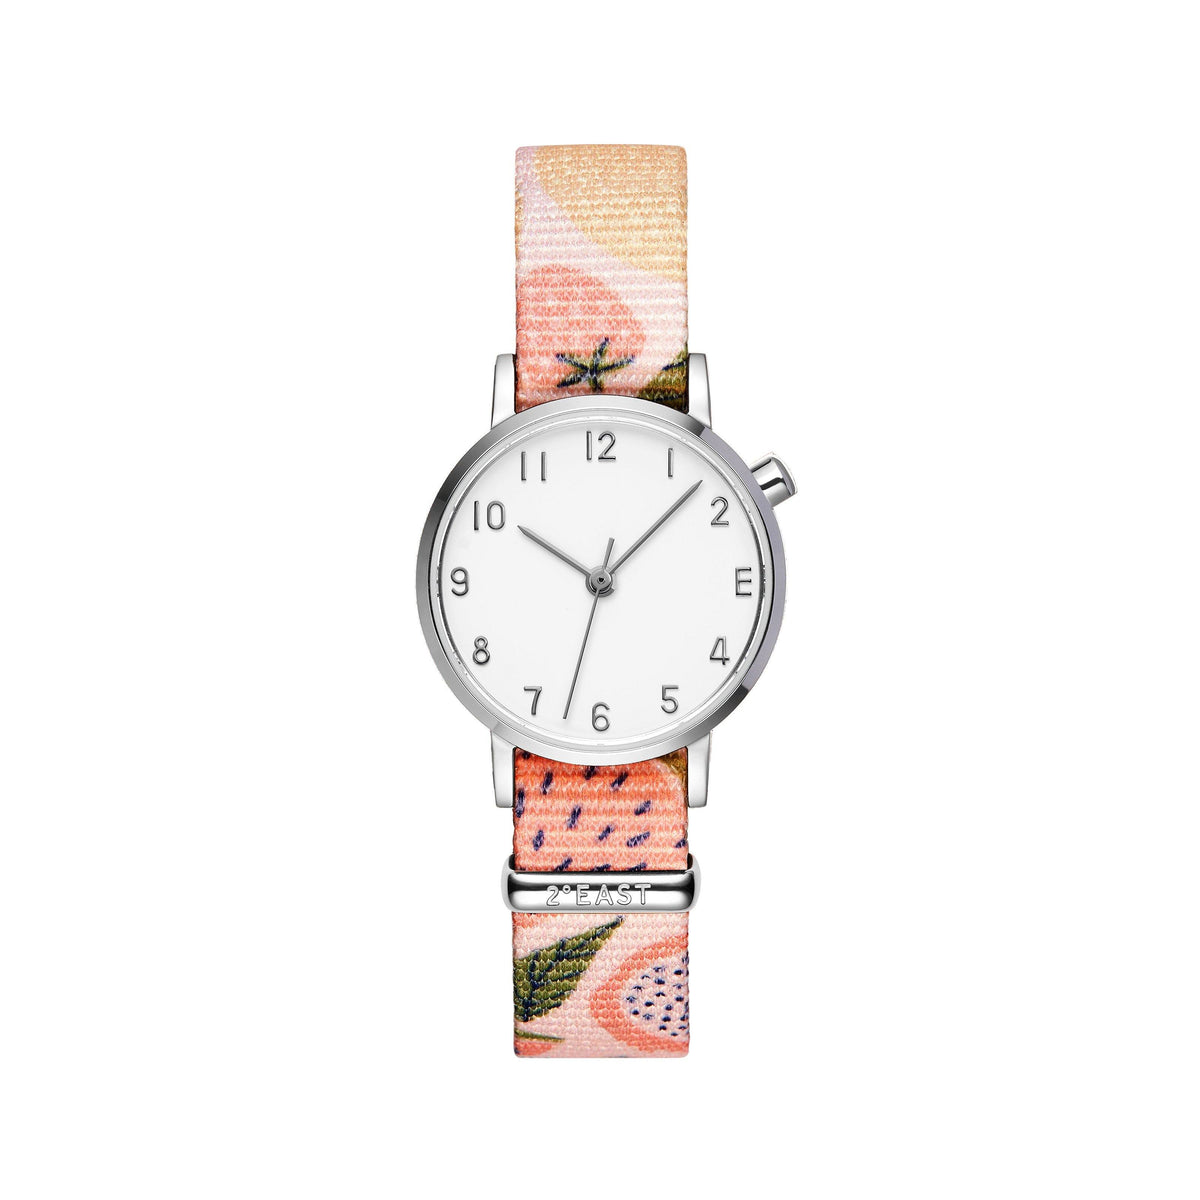 The White and Silver Watch - Fruity (Kids)